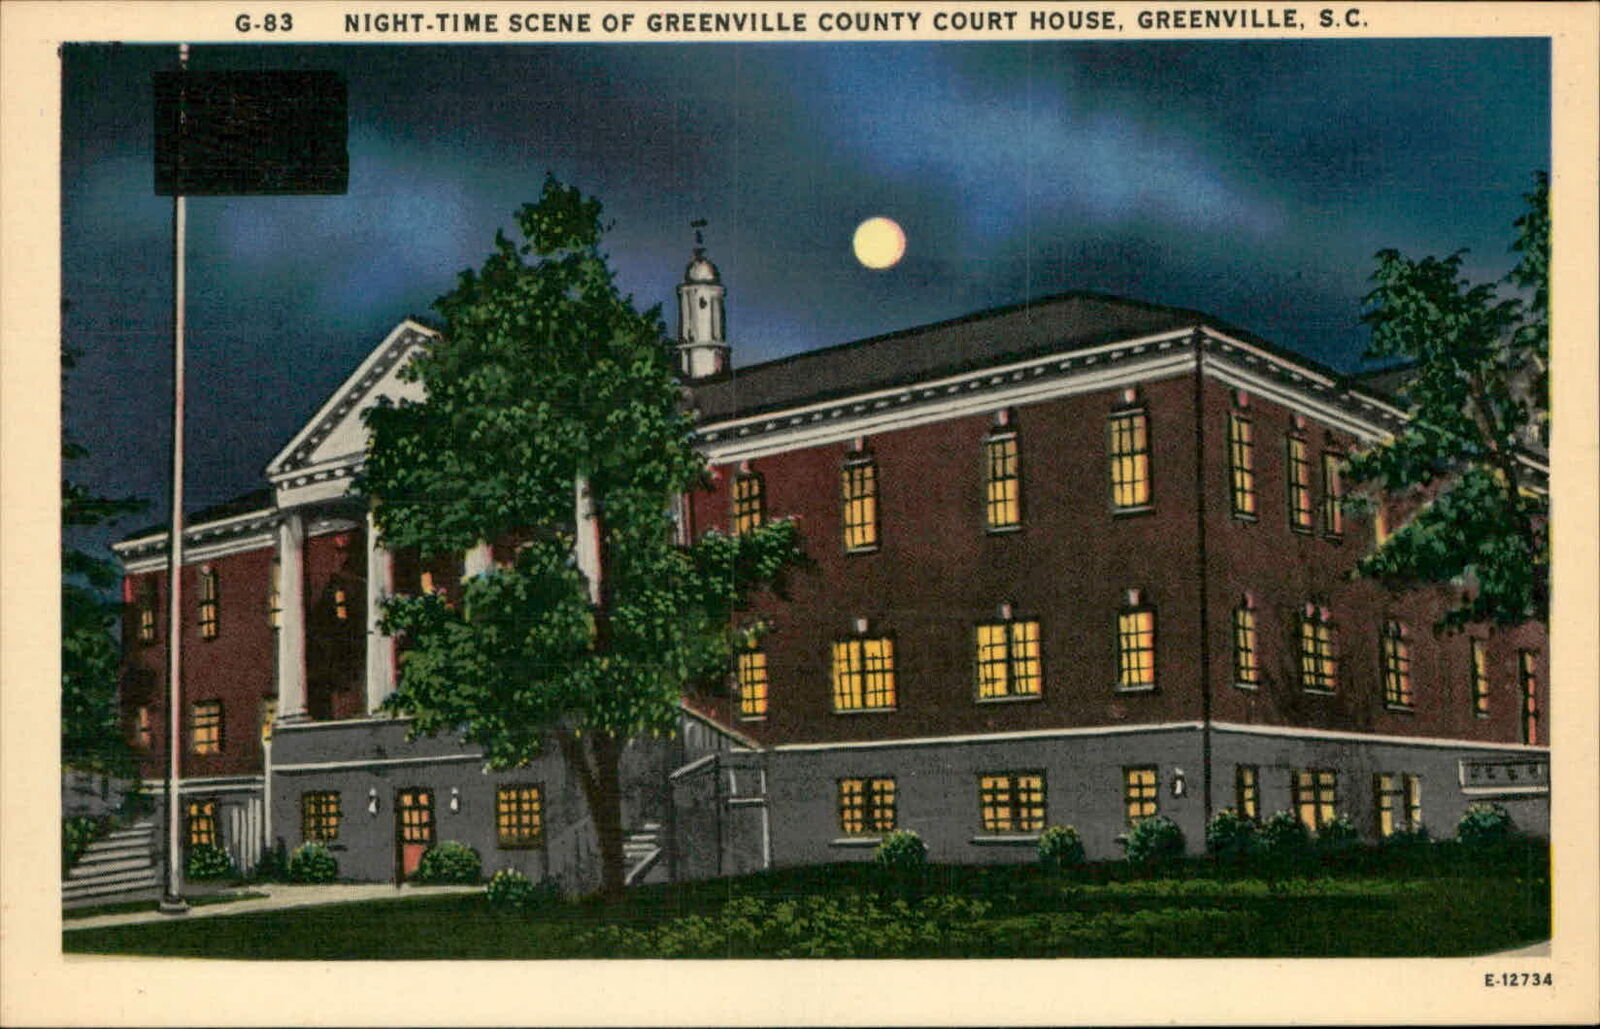 Postcard: G-83 NIGHT-TIME SCENE OF GREENVILLE COUNTY COURT HOUSE SC